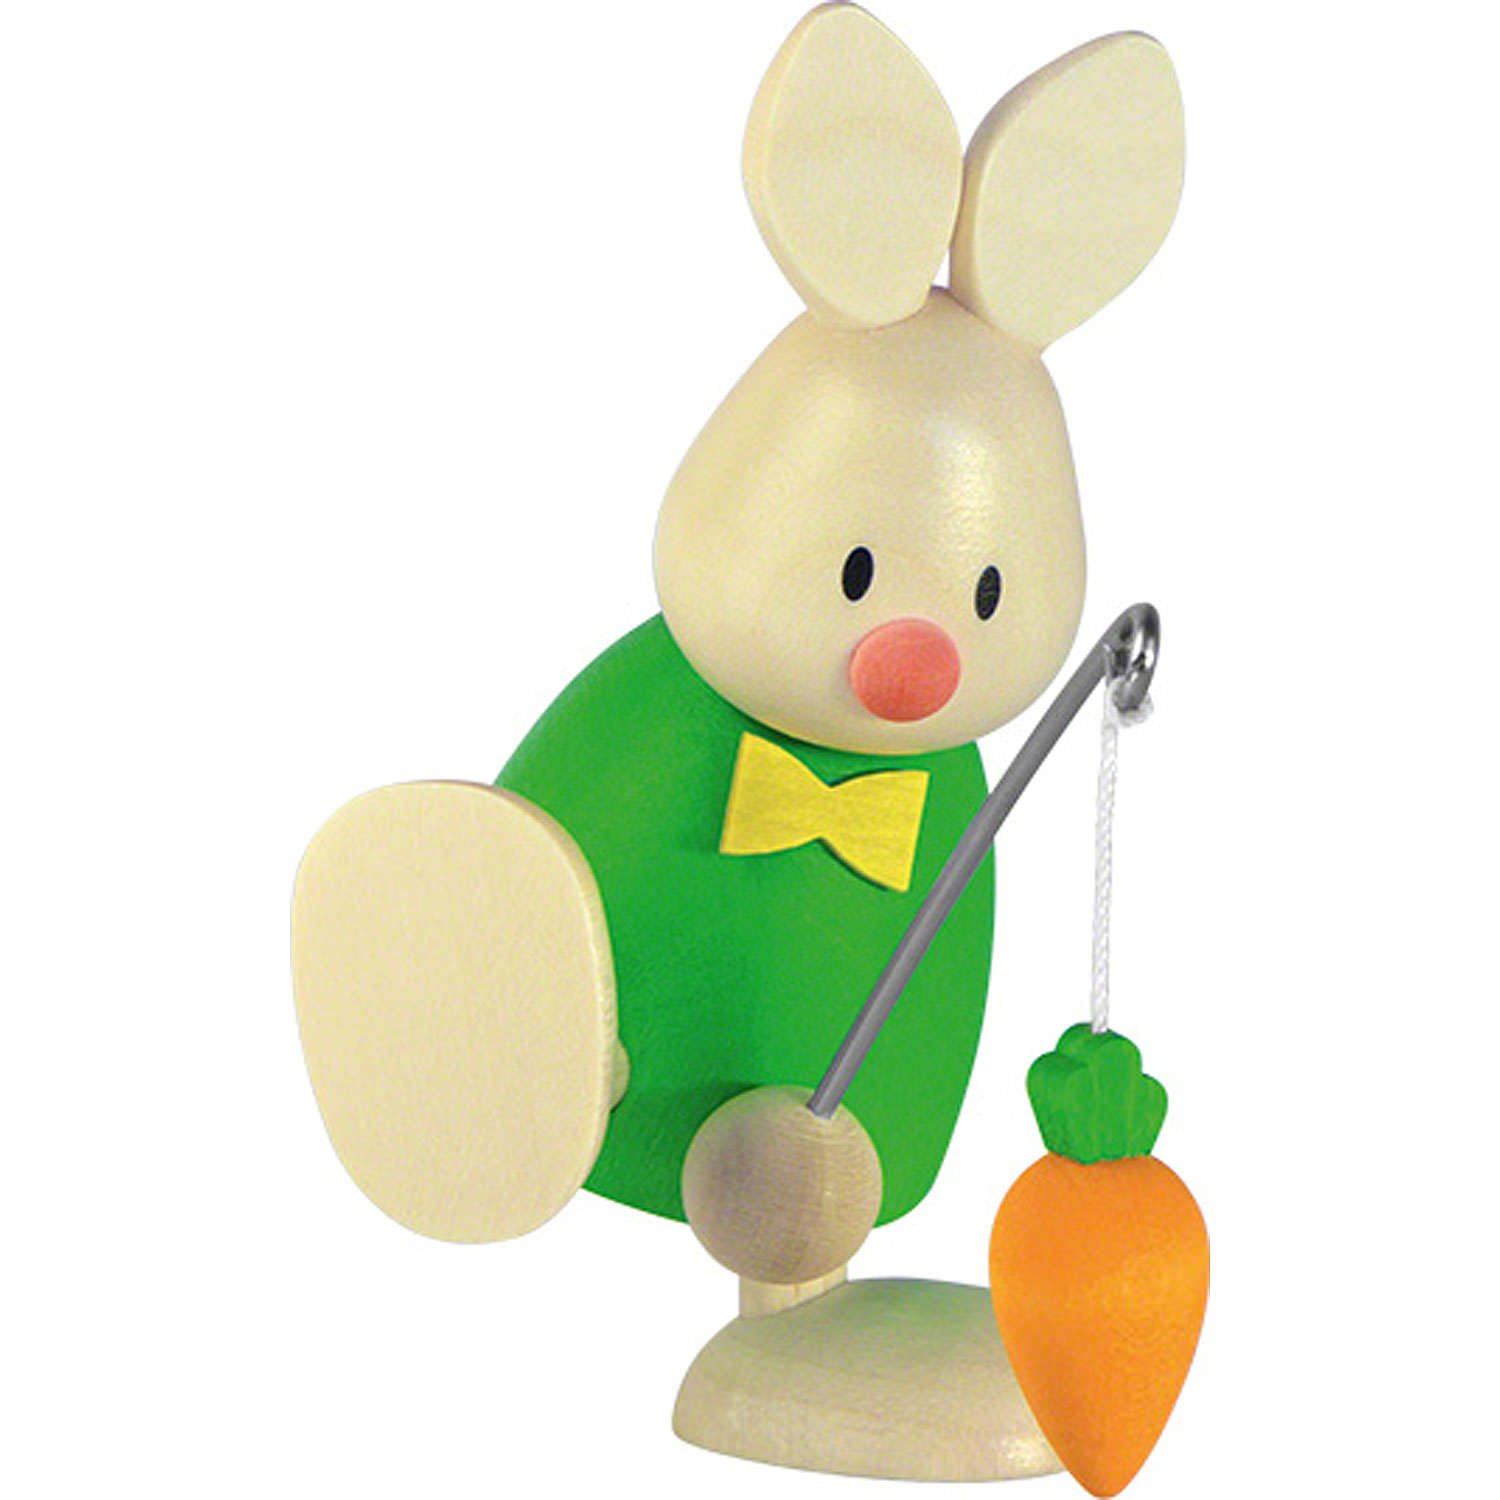 Bunny Max with Fishing Rod and Carrot (9 cm/3.5in) by Hobler Figuren